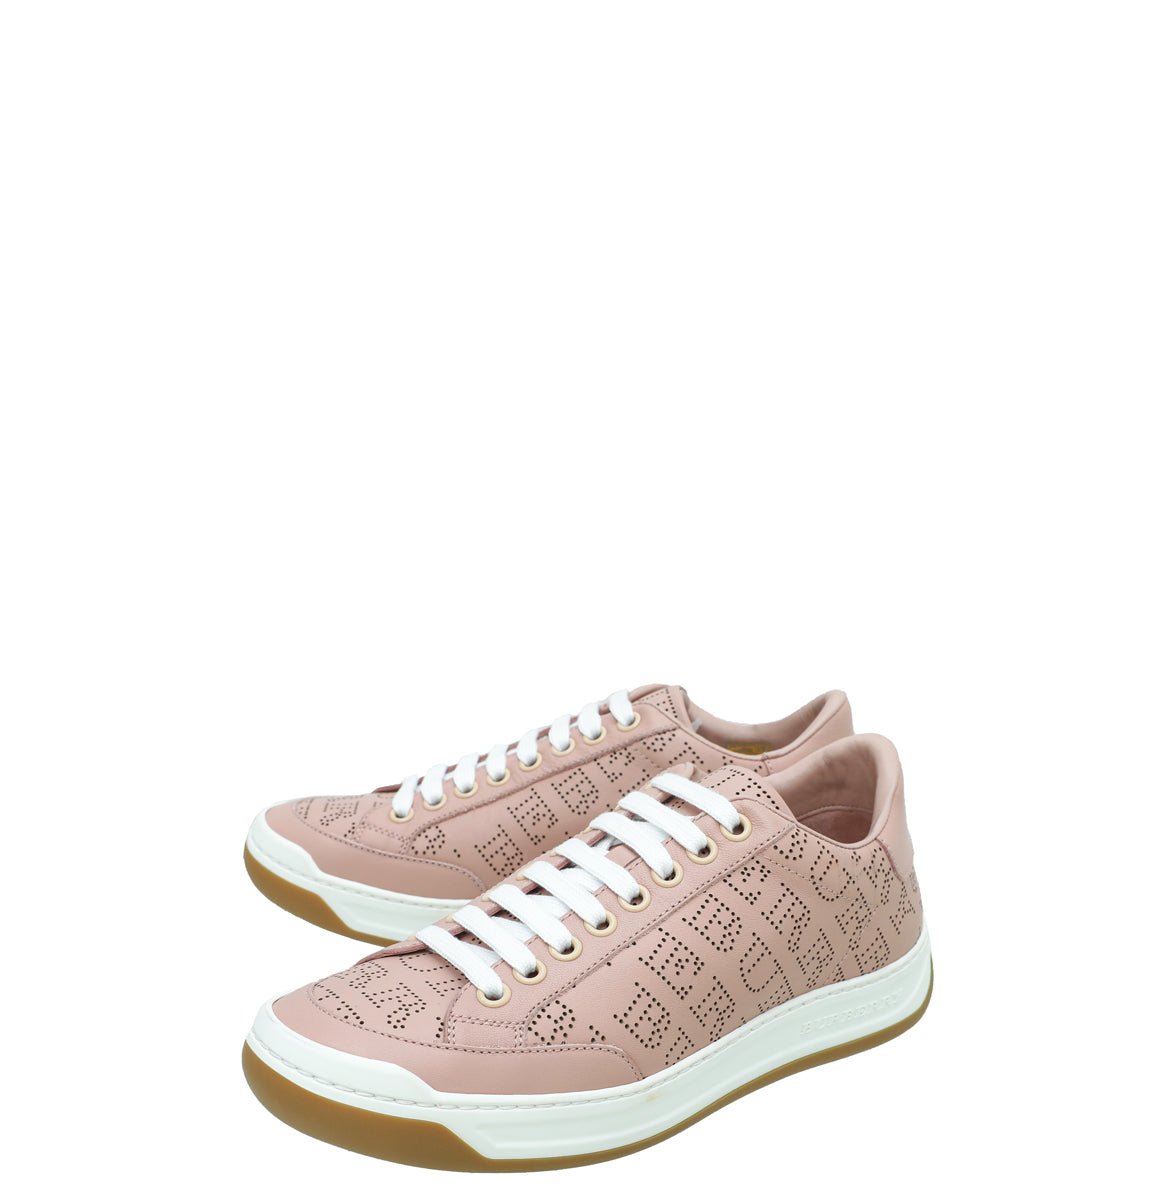 Burberry - Burberry Pink Timsbury Perforated Sneaker 35 | The Closet